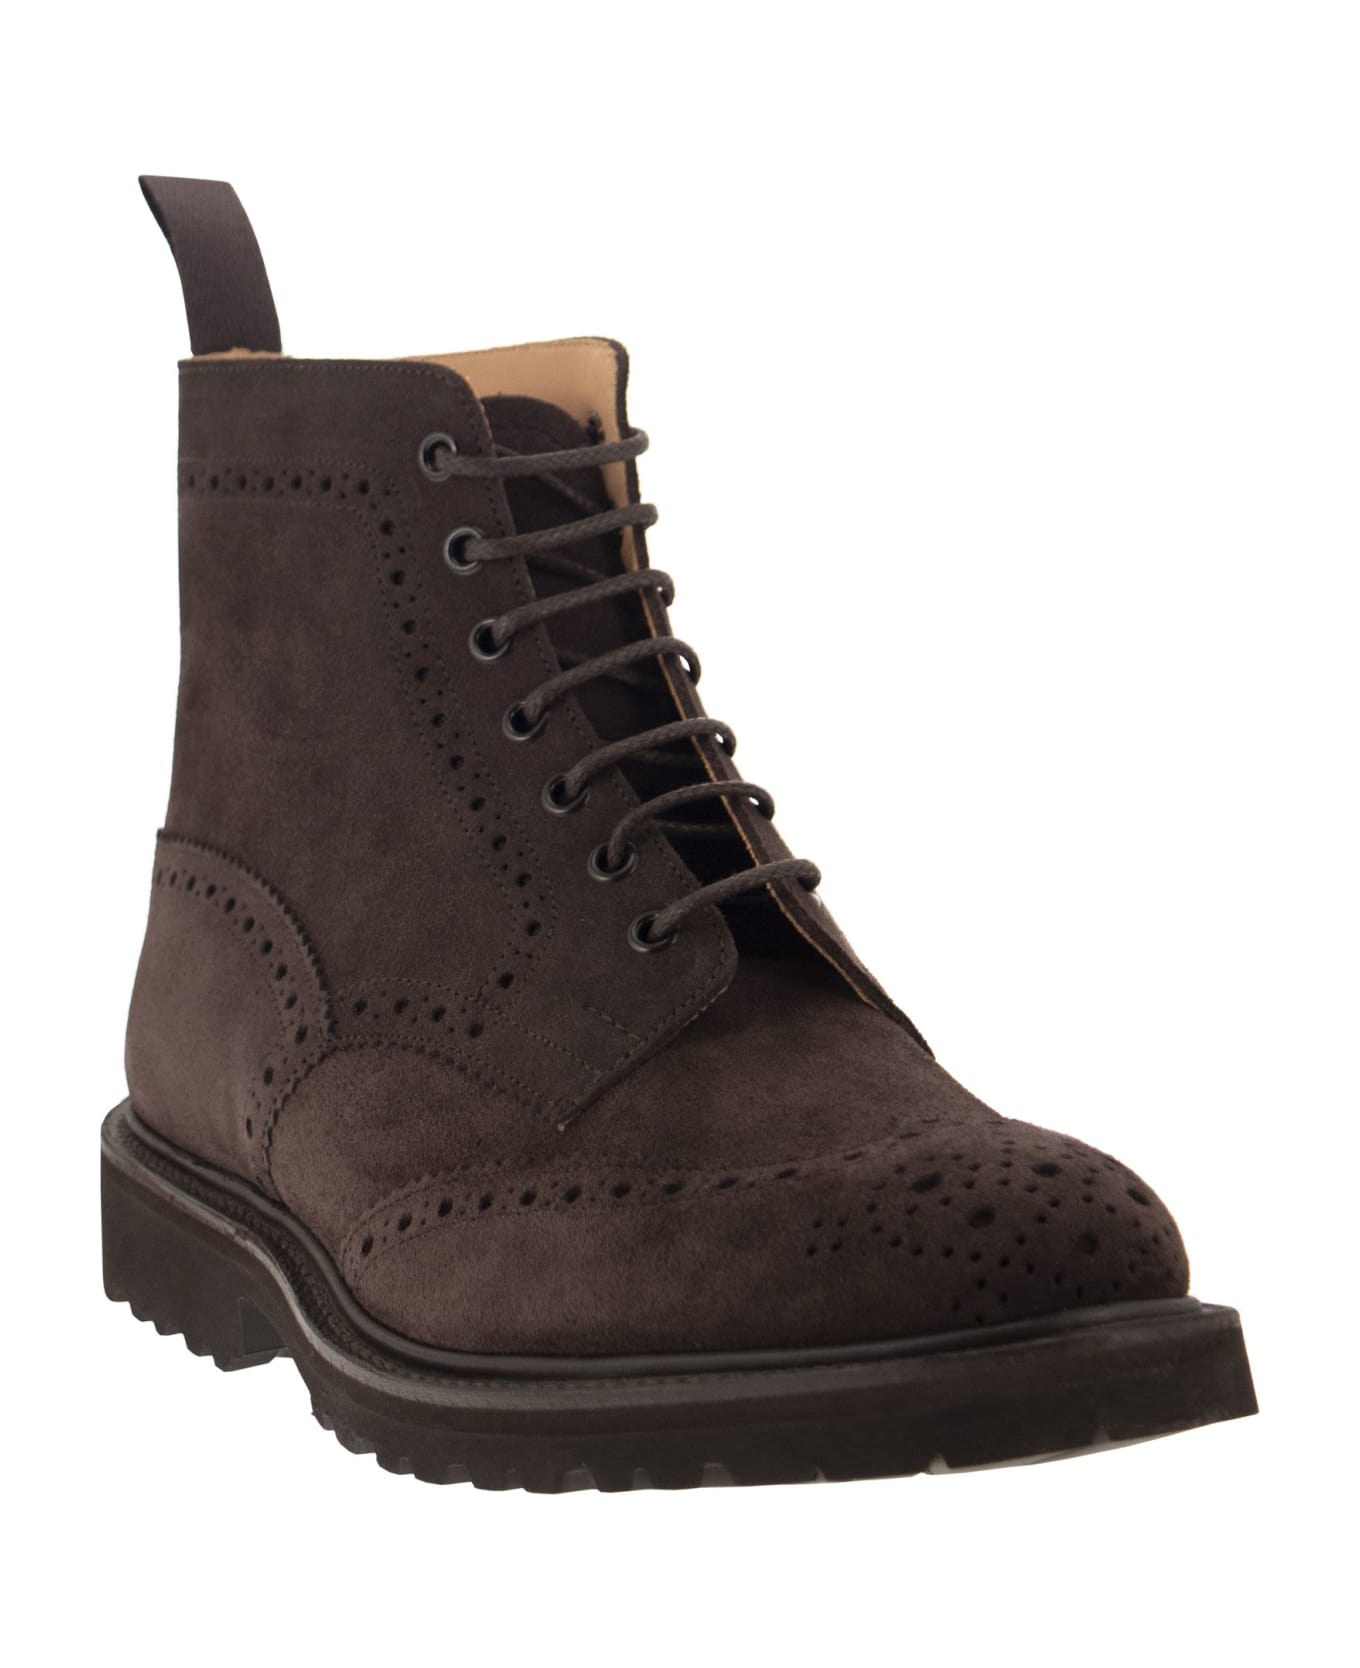 Tricker's Stow - Suede Laced Boot - Coffee